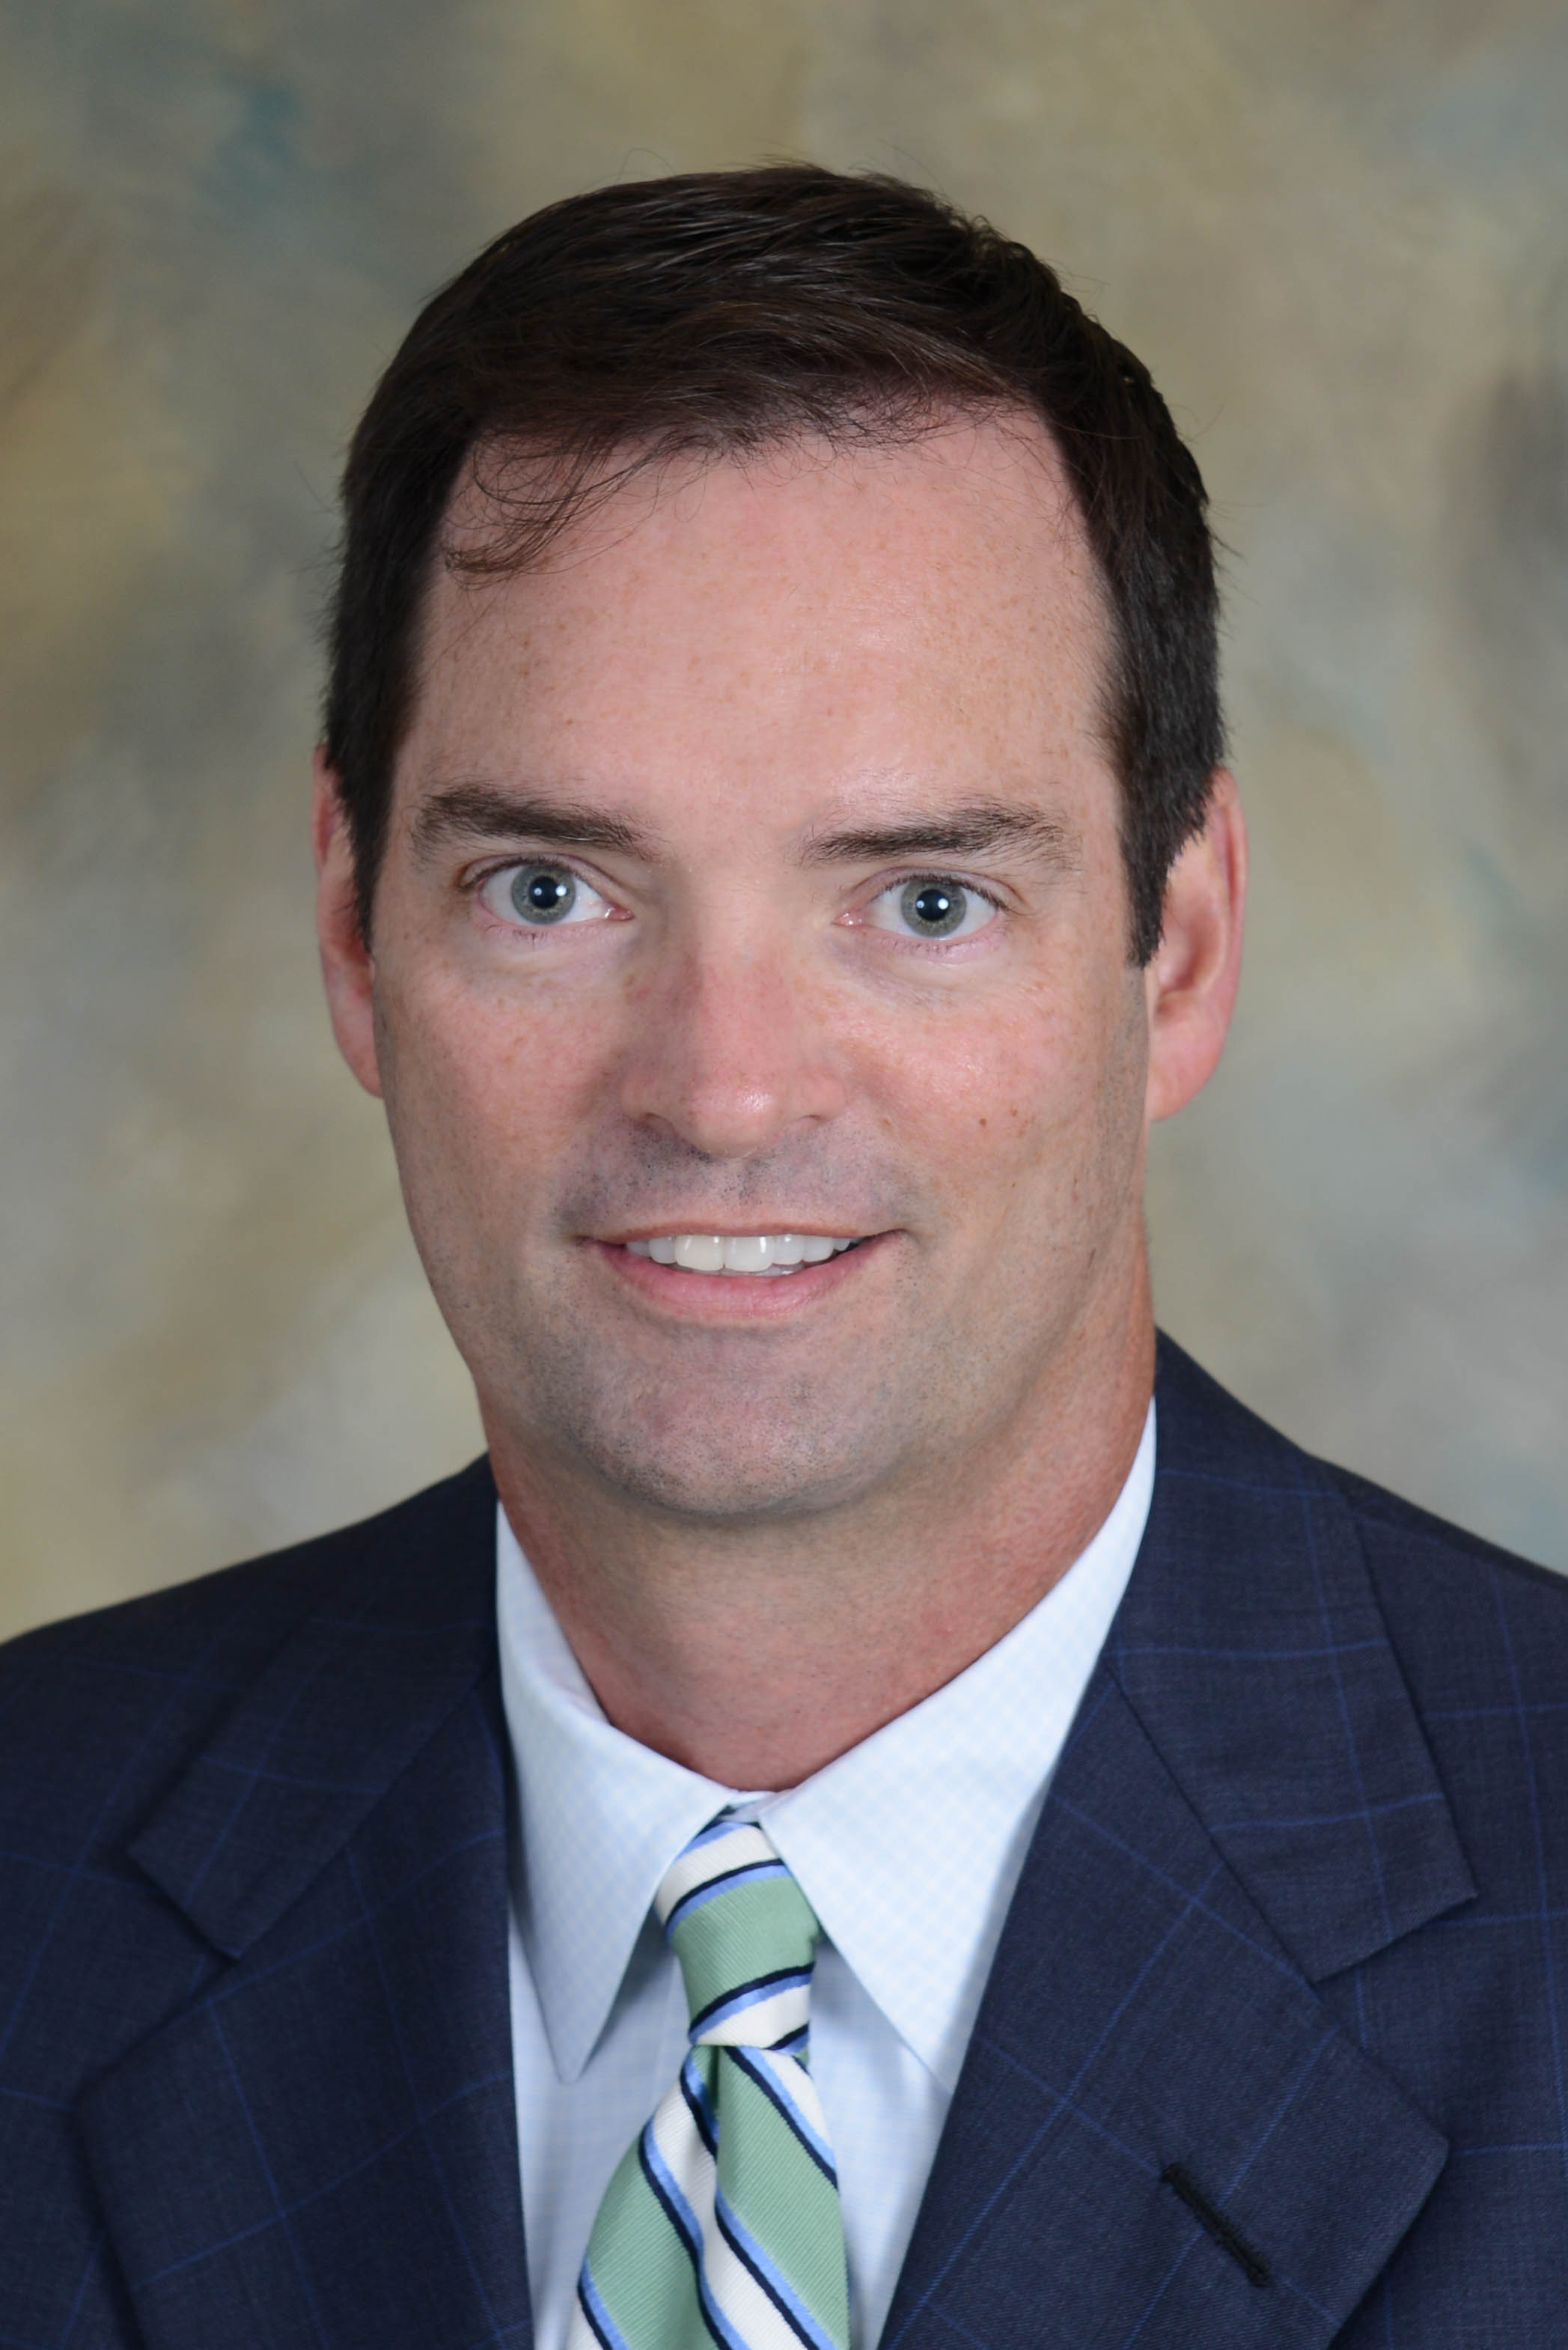 Tom Hutchens is executive vice president, production at Angel Oak Mortgage Solutions